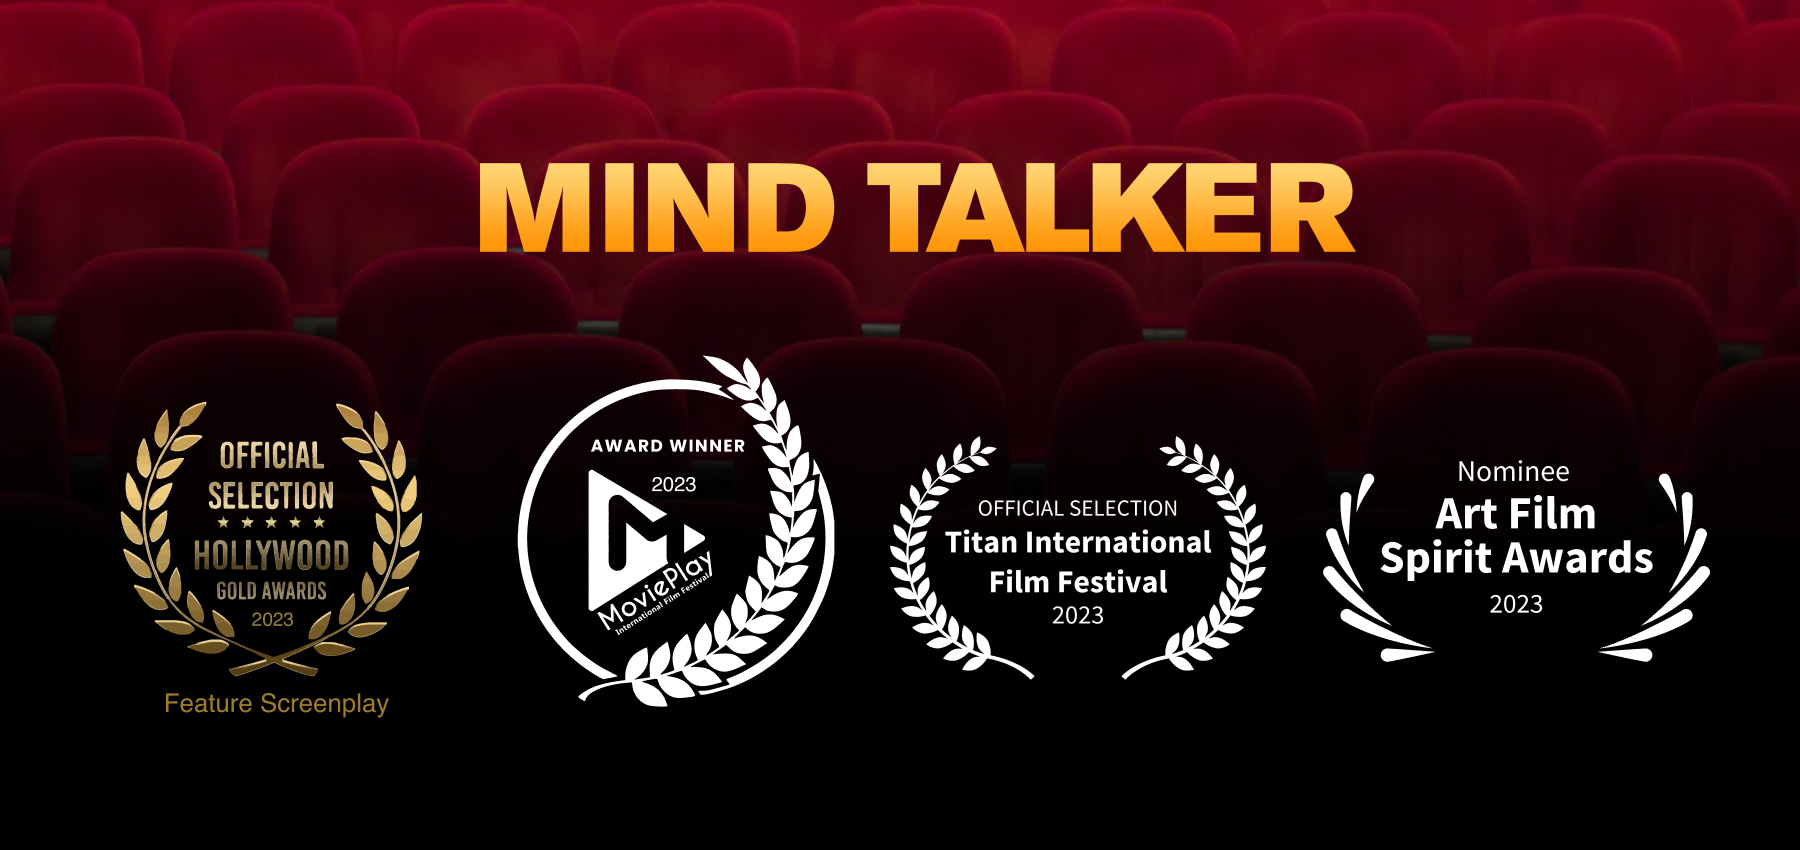 Mind Talker Movie won Best Science Fiction Film and a Honorable Mention at Movie Play Internation Film Festival 2023